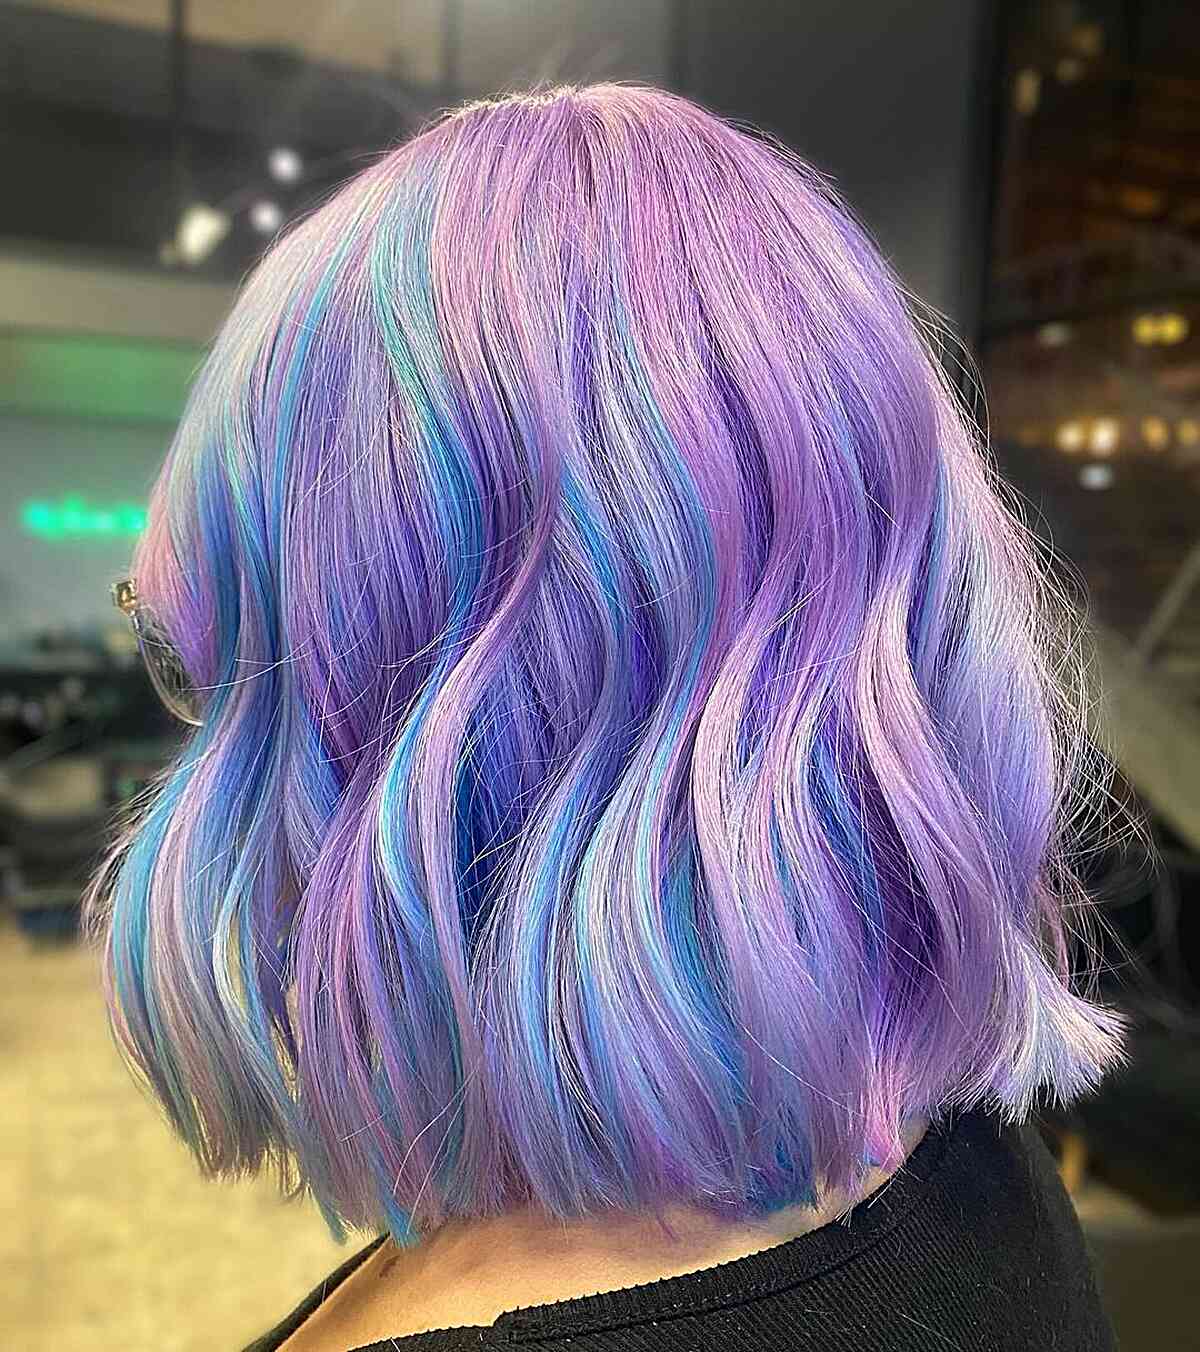 Bright Cotton Candy Pastel Blue and Purple for Short Bob Hair